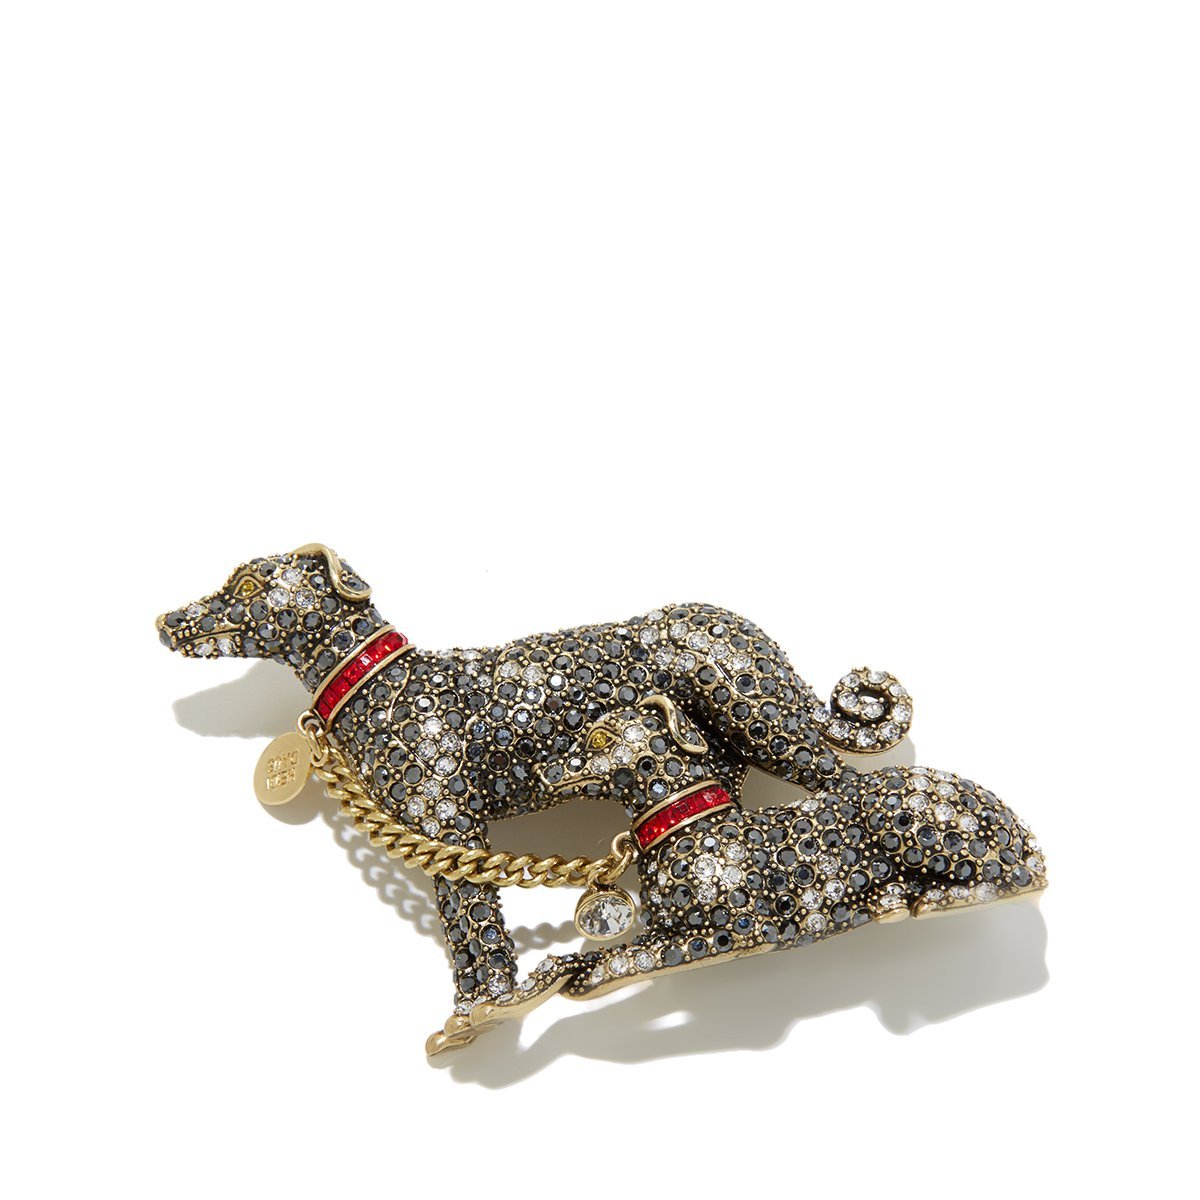 Primary image for Heidi Daus Handsome Hounds Crystal Pin Brooch